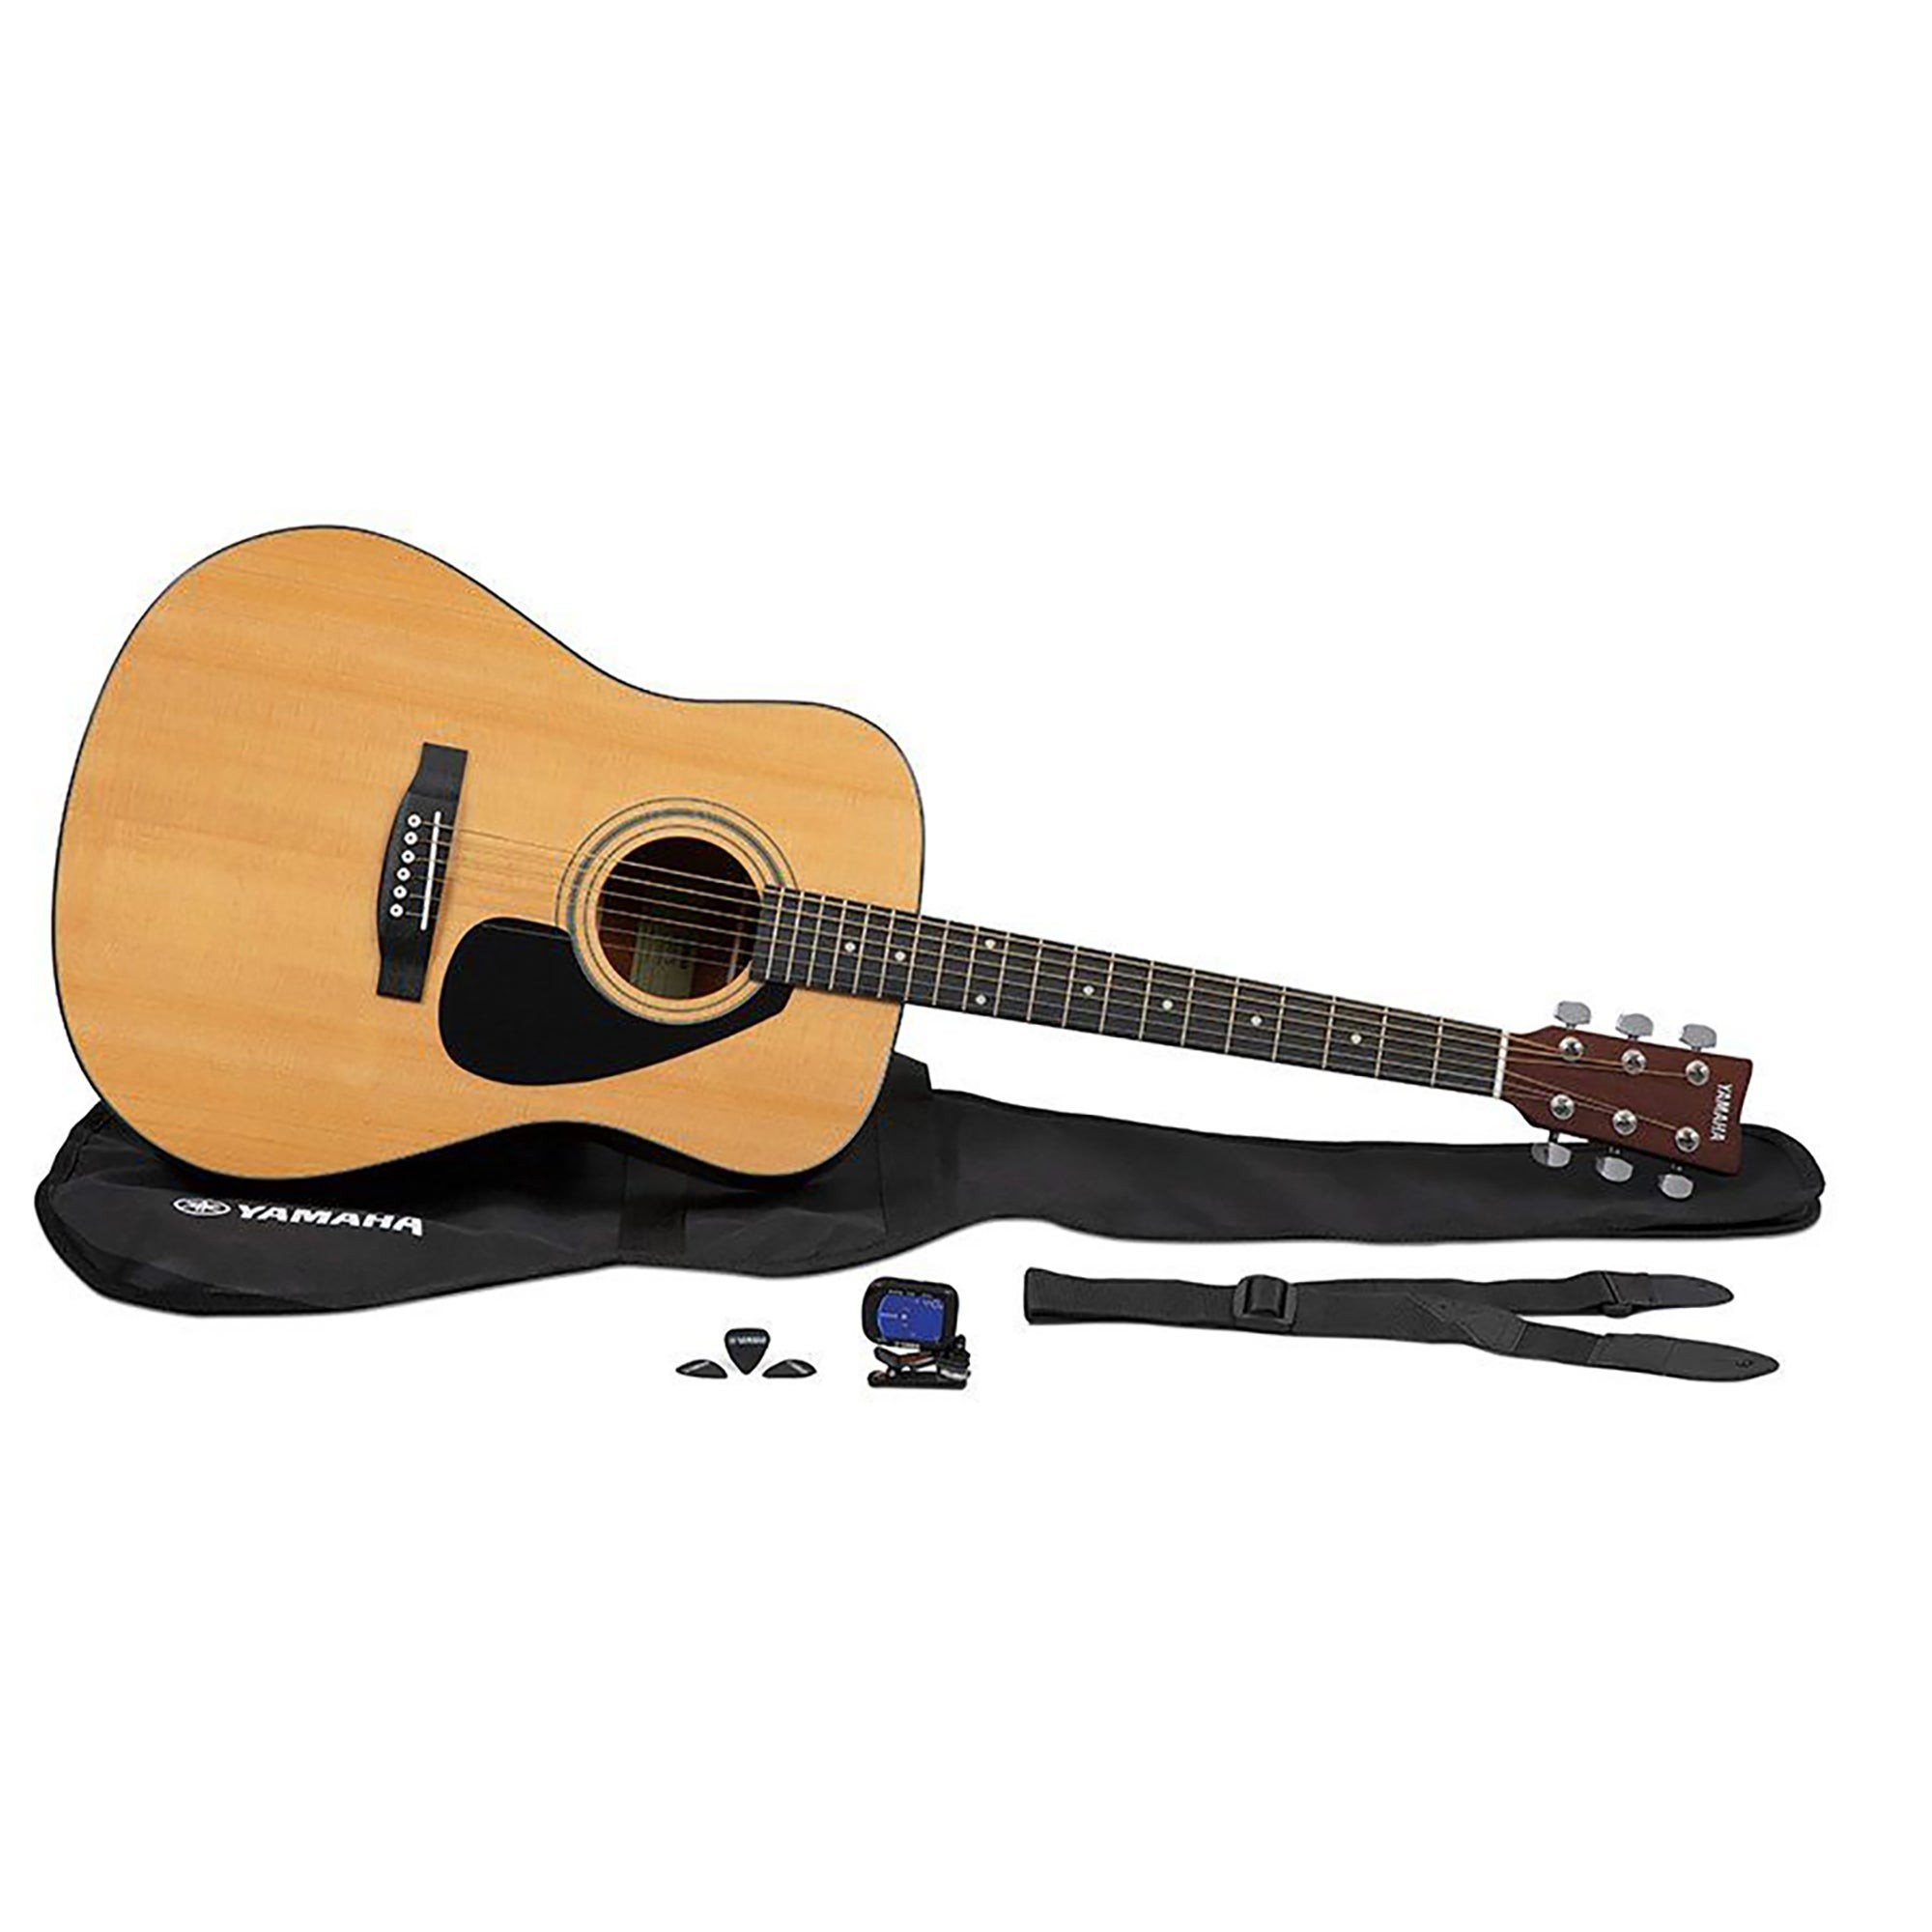 GigMaker Deluxe FD01S Acoustic Guitar Package